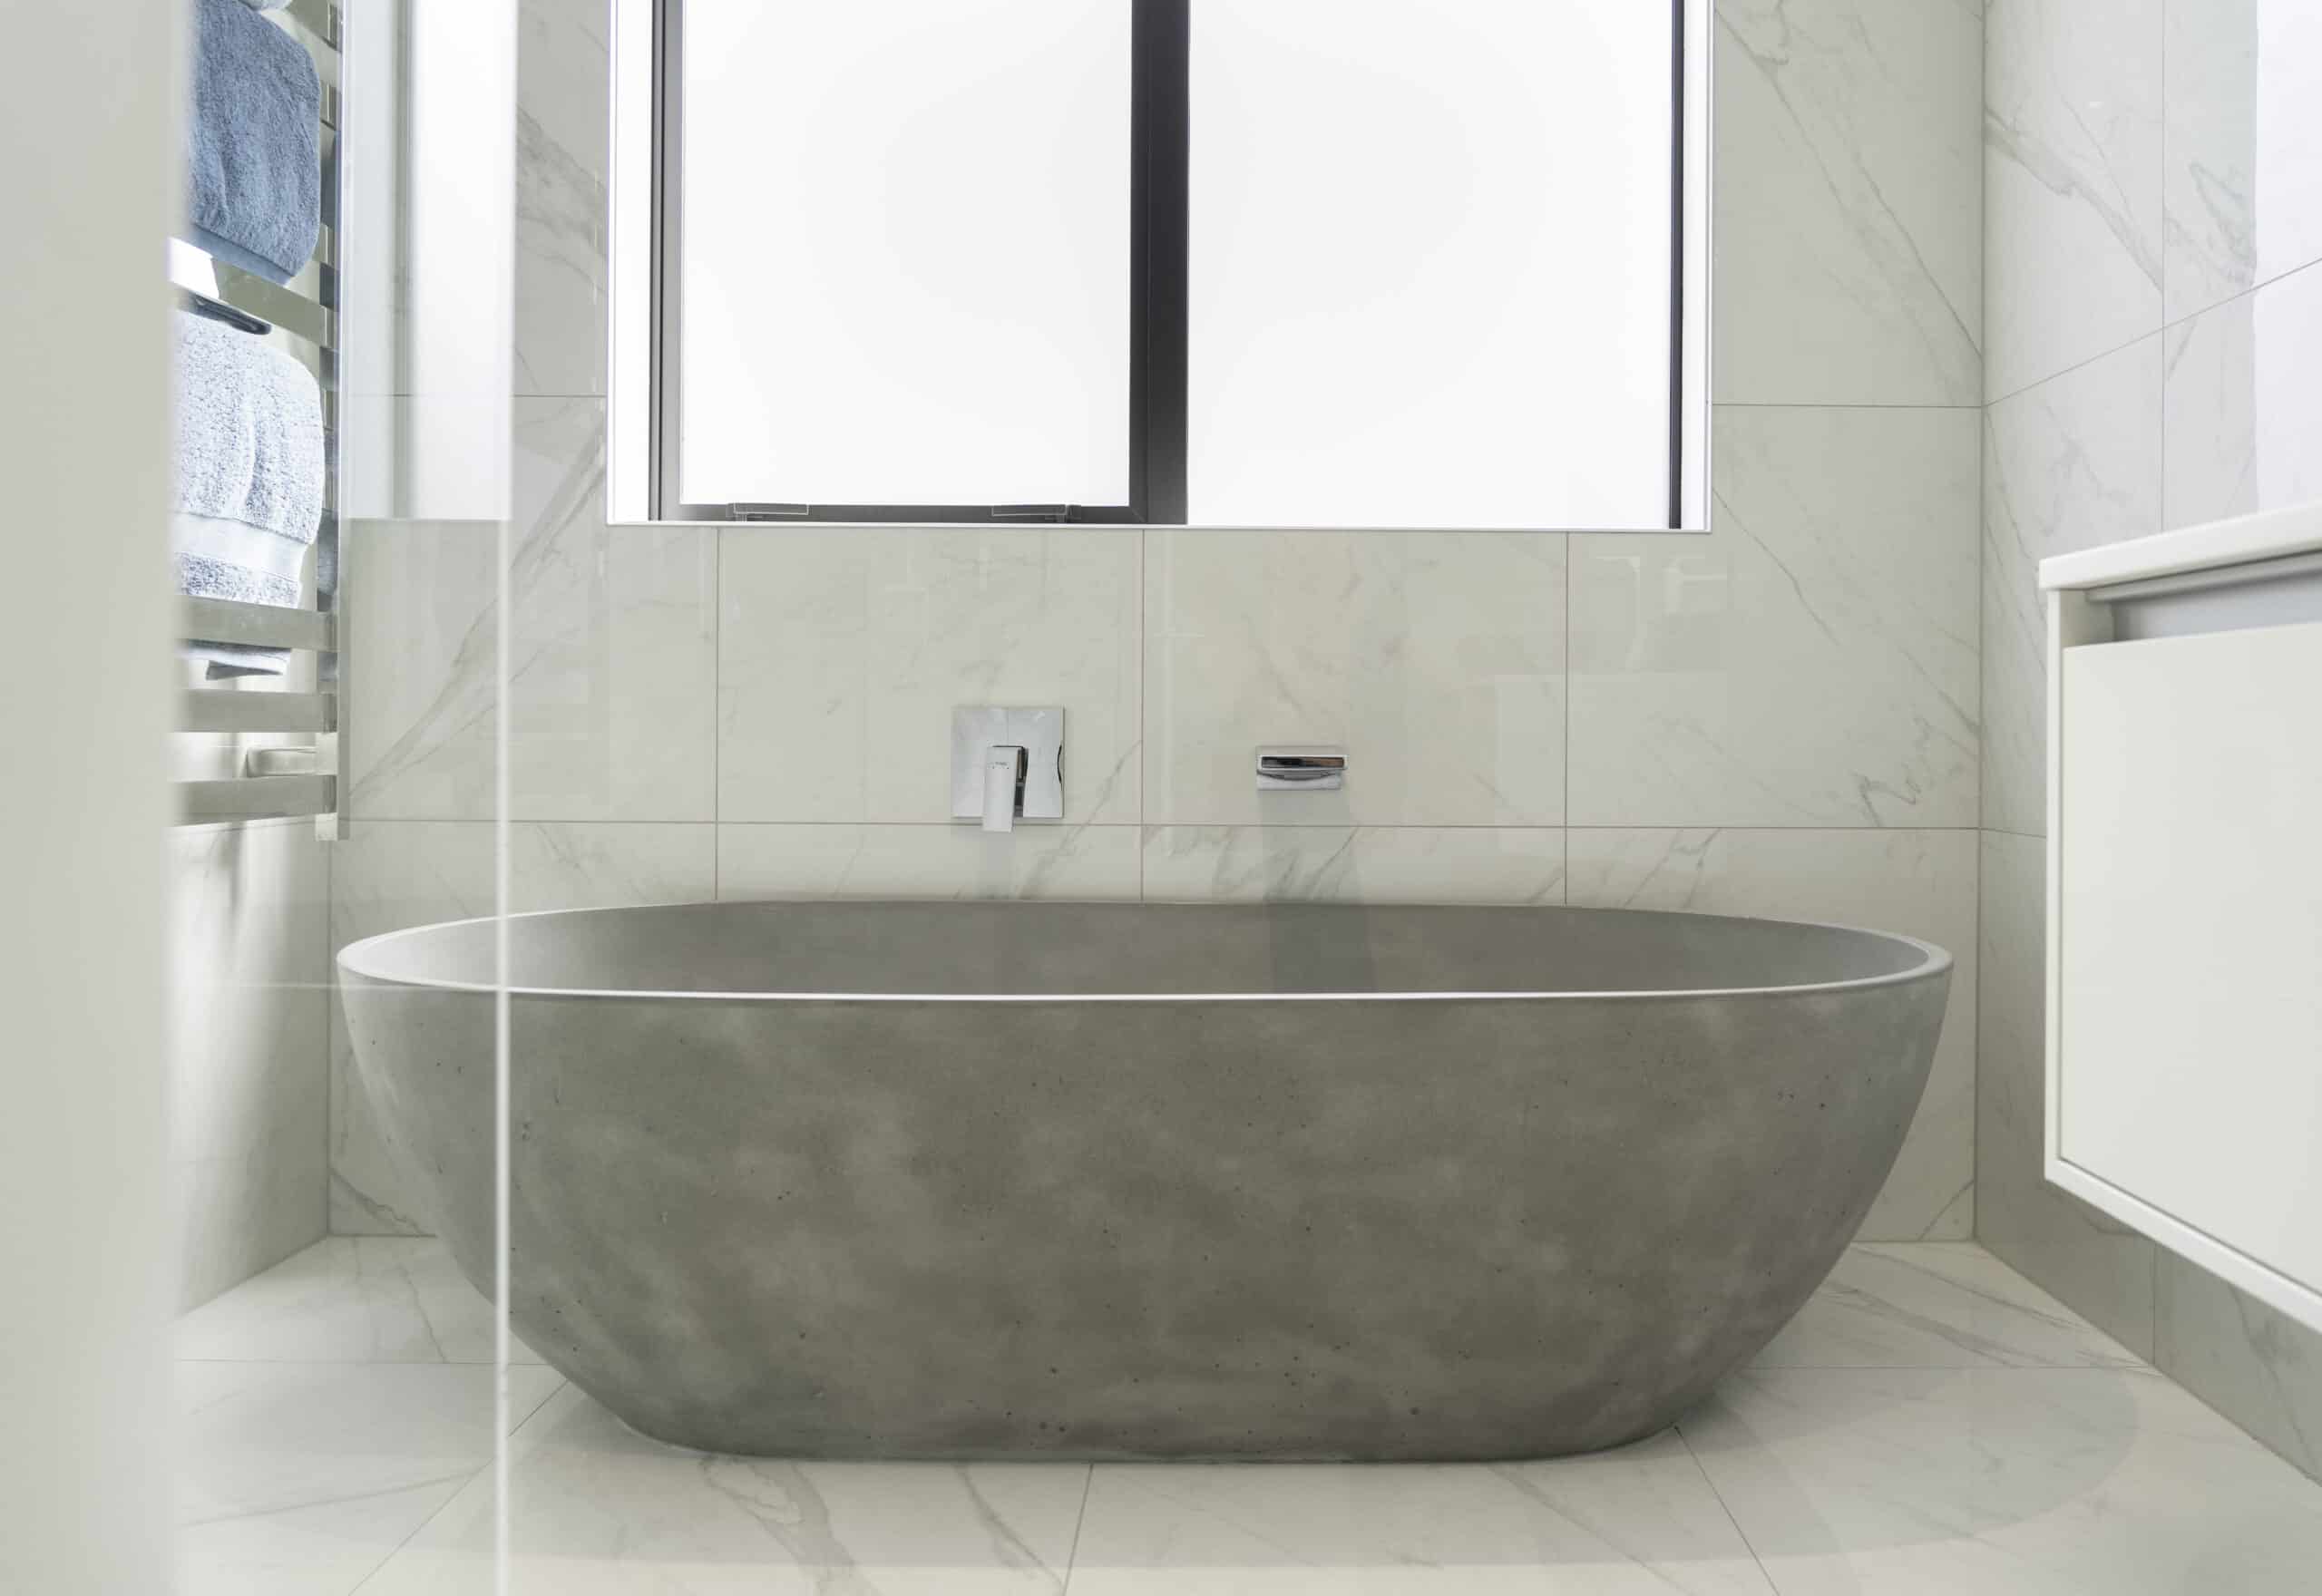 Fowler-Homes-Queenstown-Show-Home-Jack's-Point-Stone-Bath